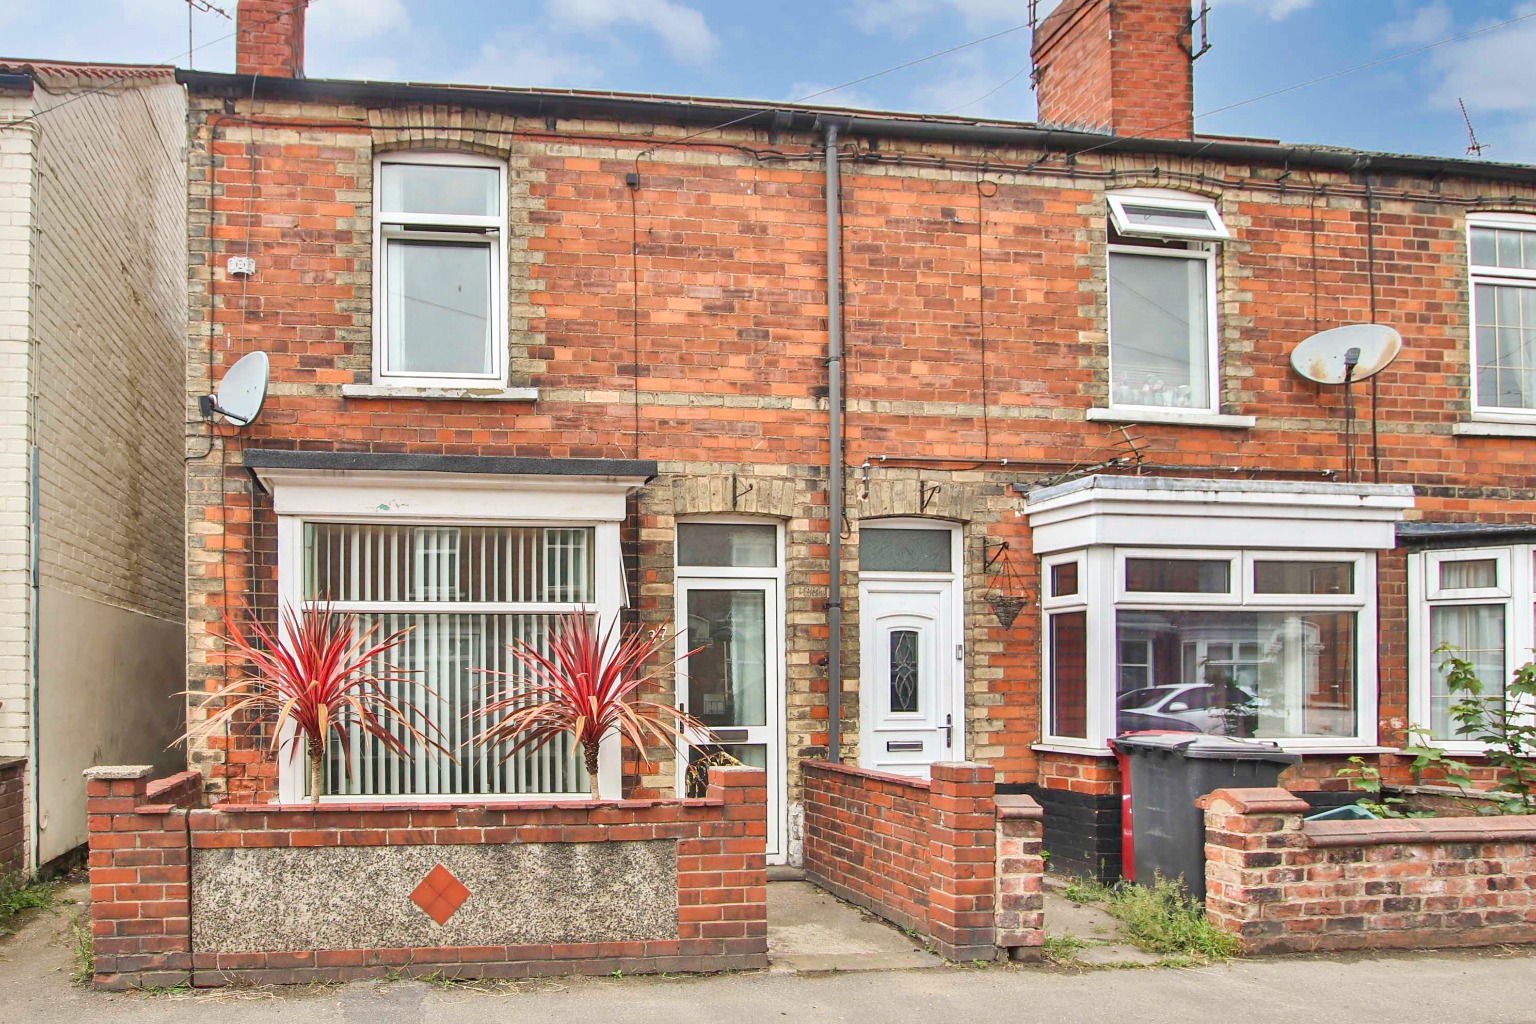 3 bed end of terrace house for sale in Queens Avenue, Barton-Upon-Humber, DN18